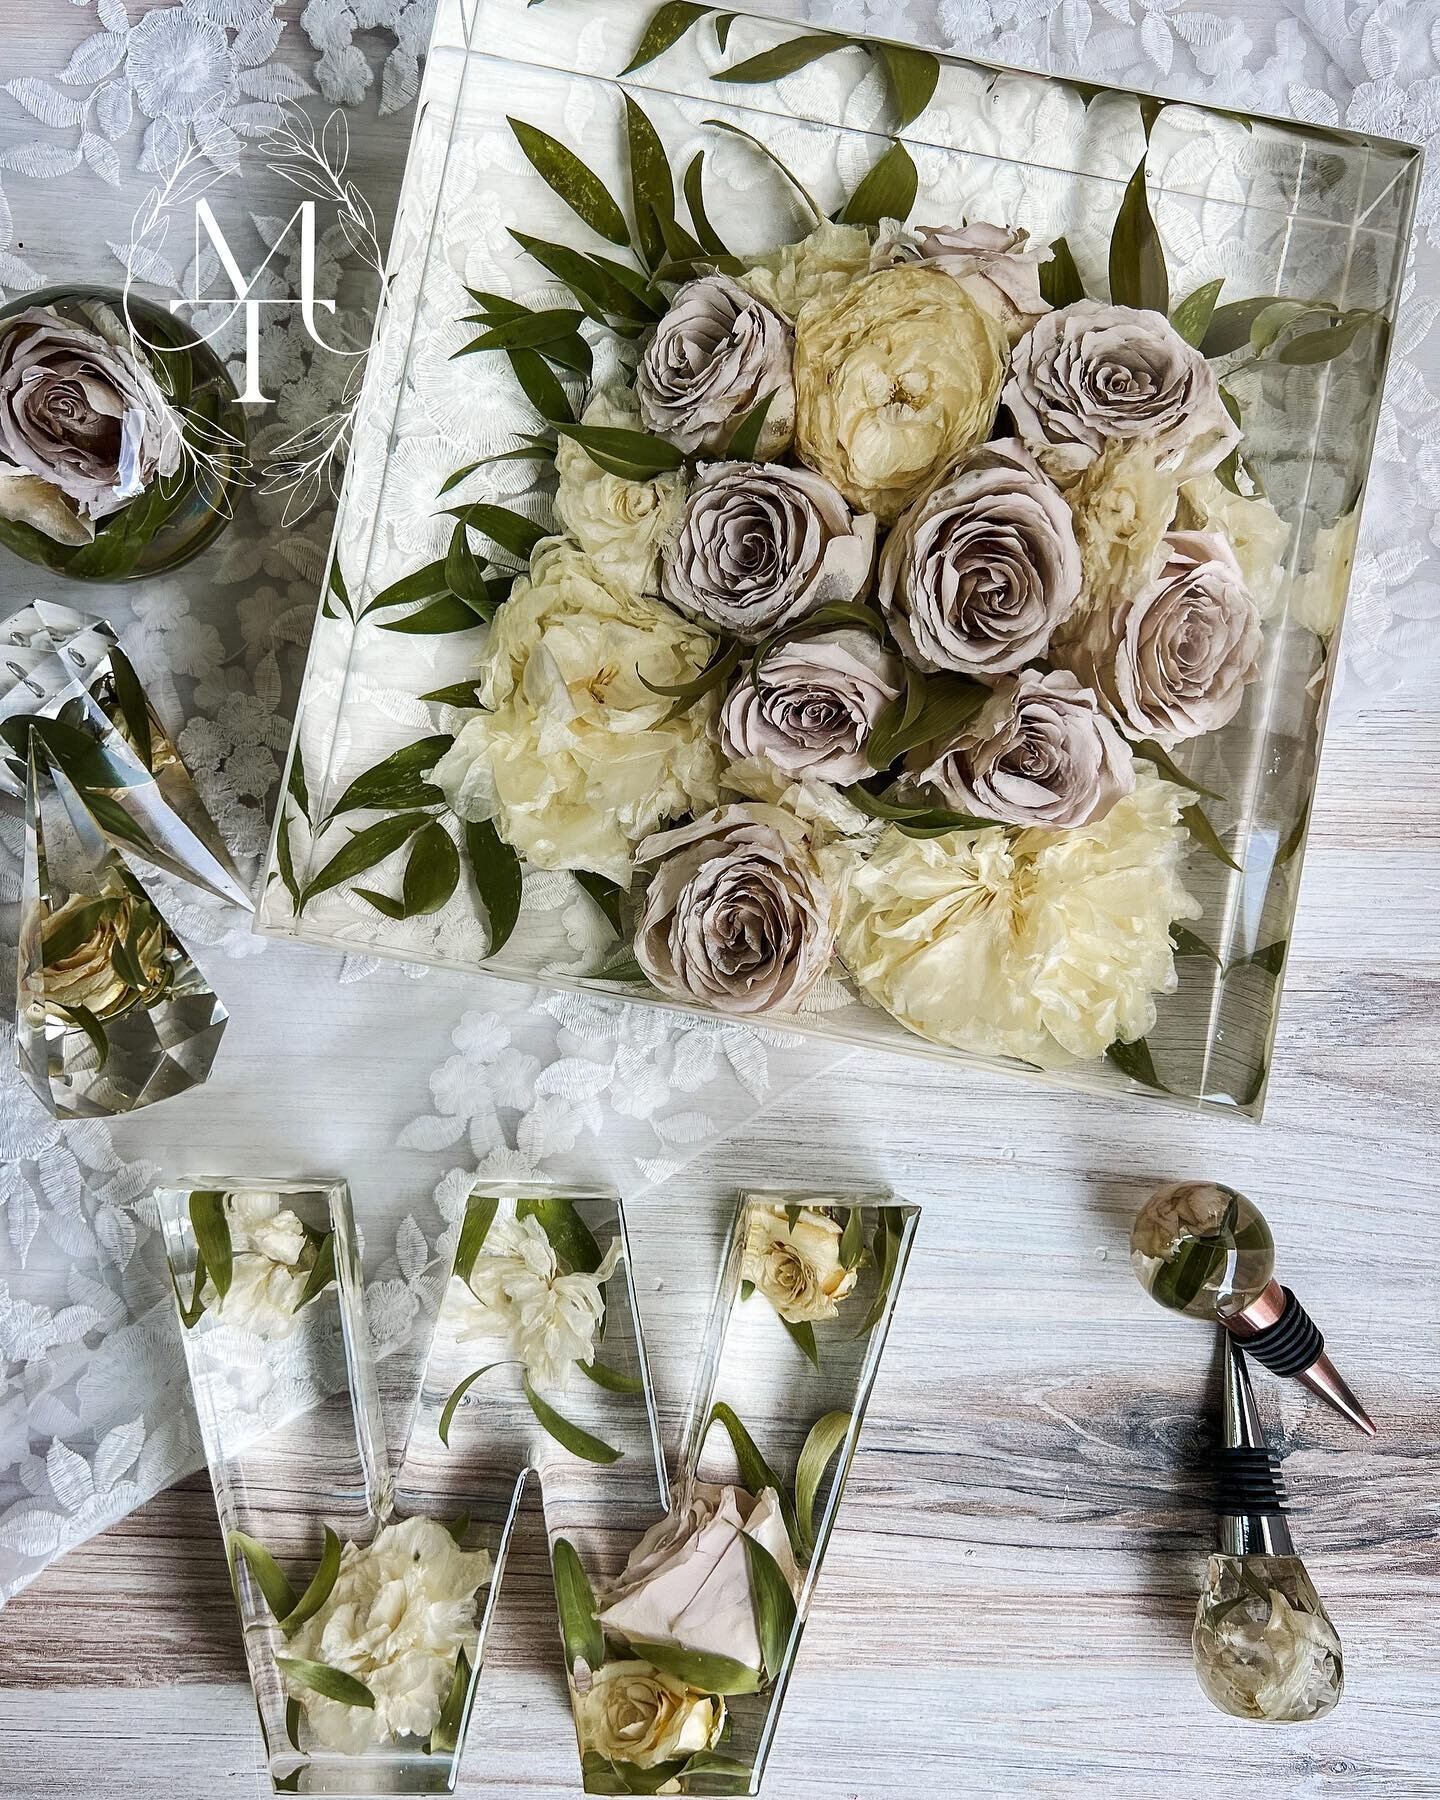 For Kaylla 🤍

A beautiful Keepsake collection for her beautifully preserved blooms. 💐